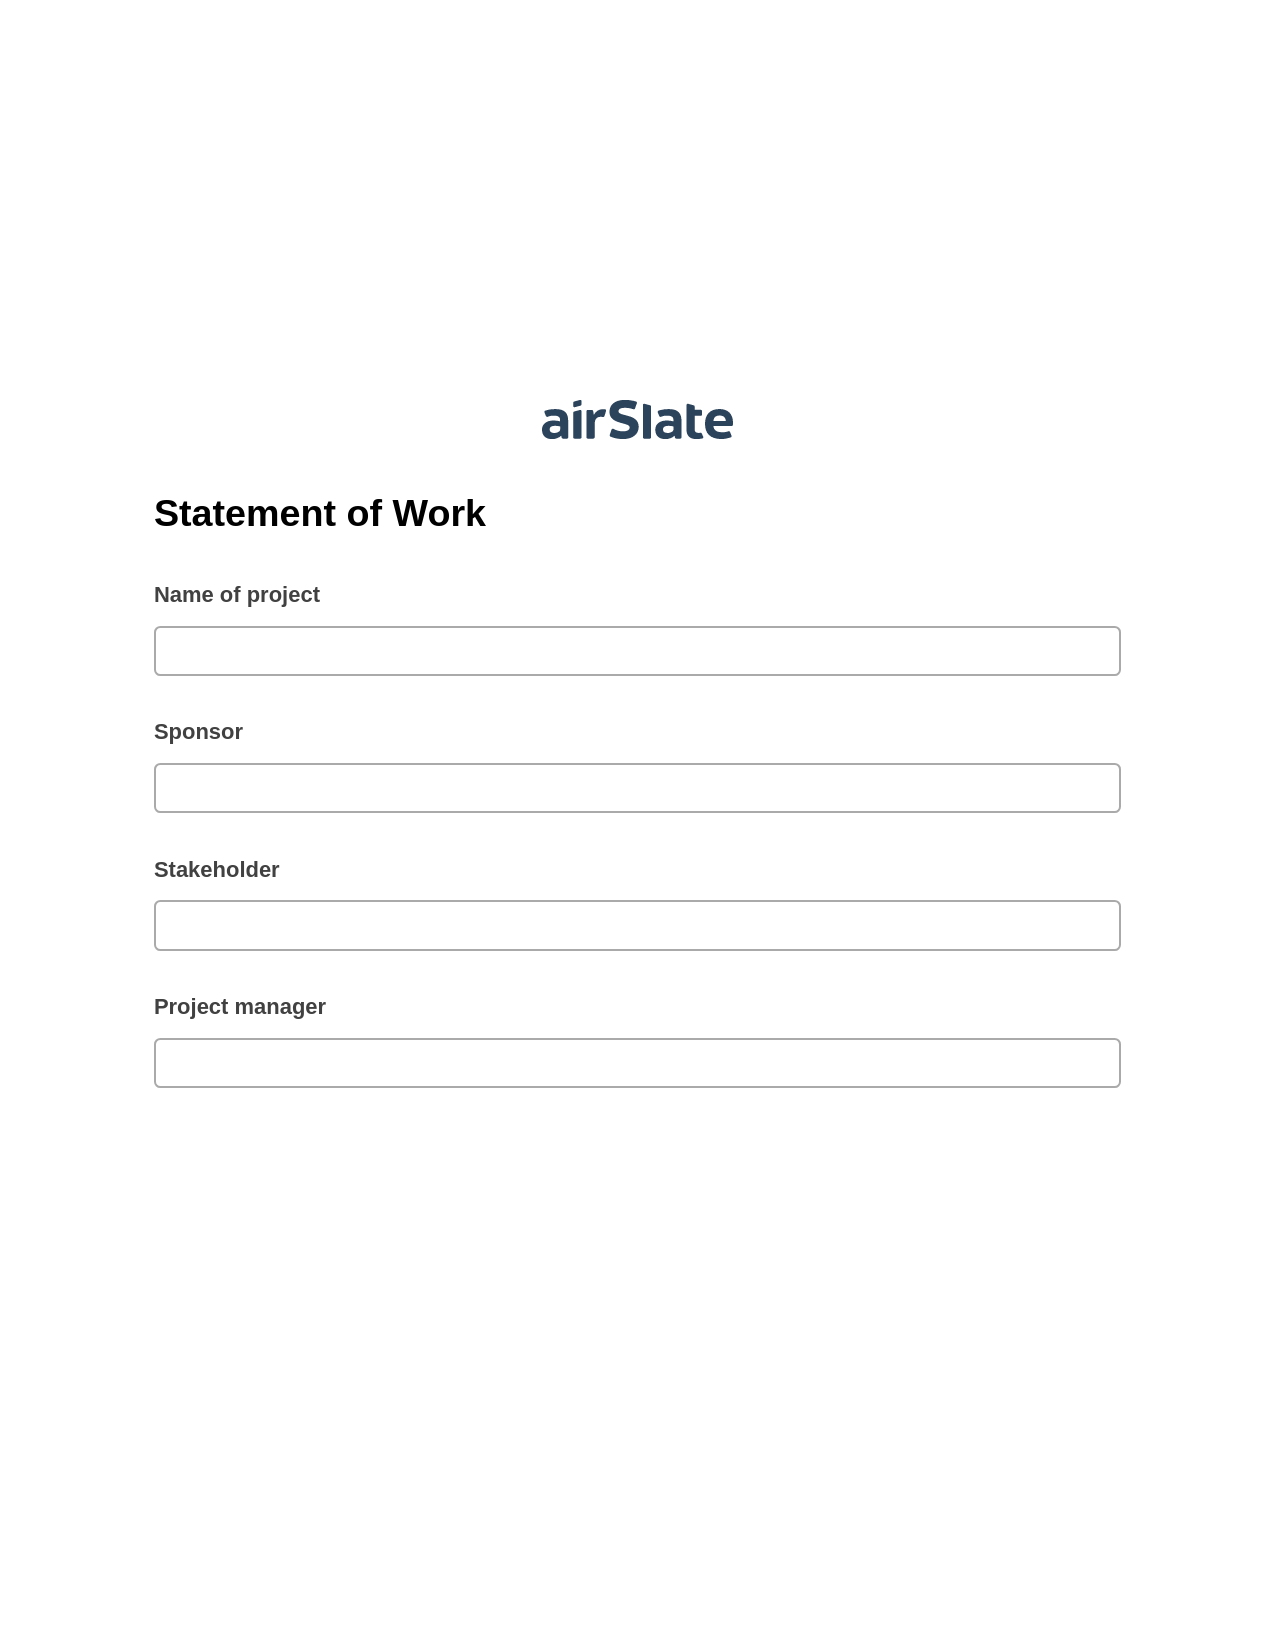 Statement of Work Pre-fill from CSV File Dropdown Options Bot, 1Create Slate every Google Sheet Update Bot, OneDrive Bot